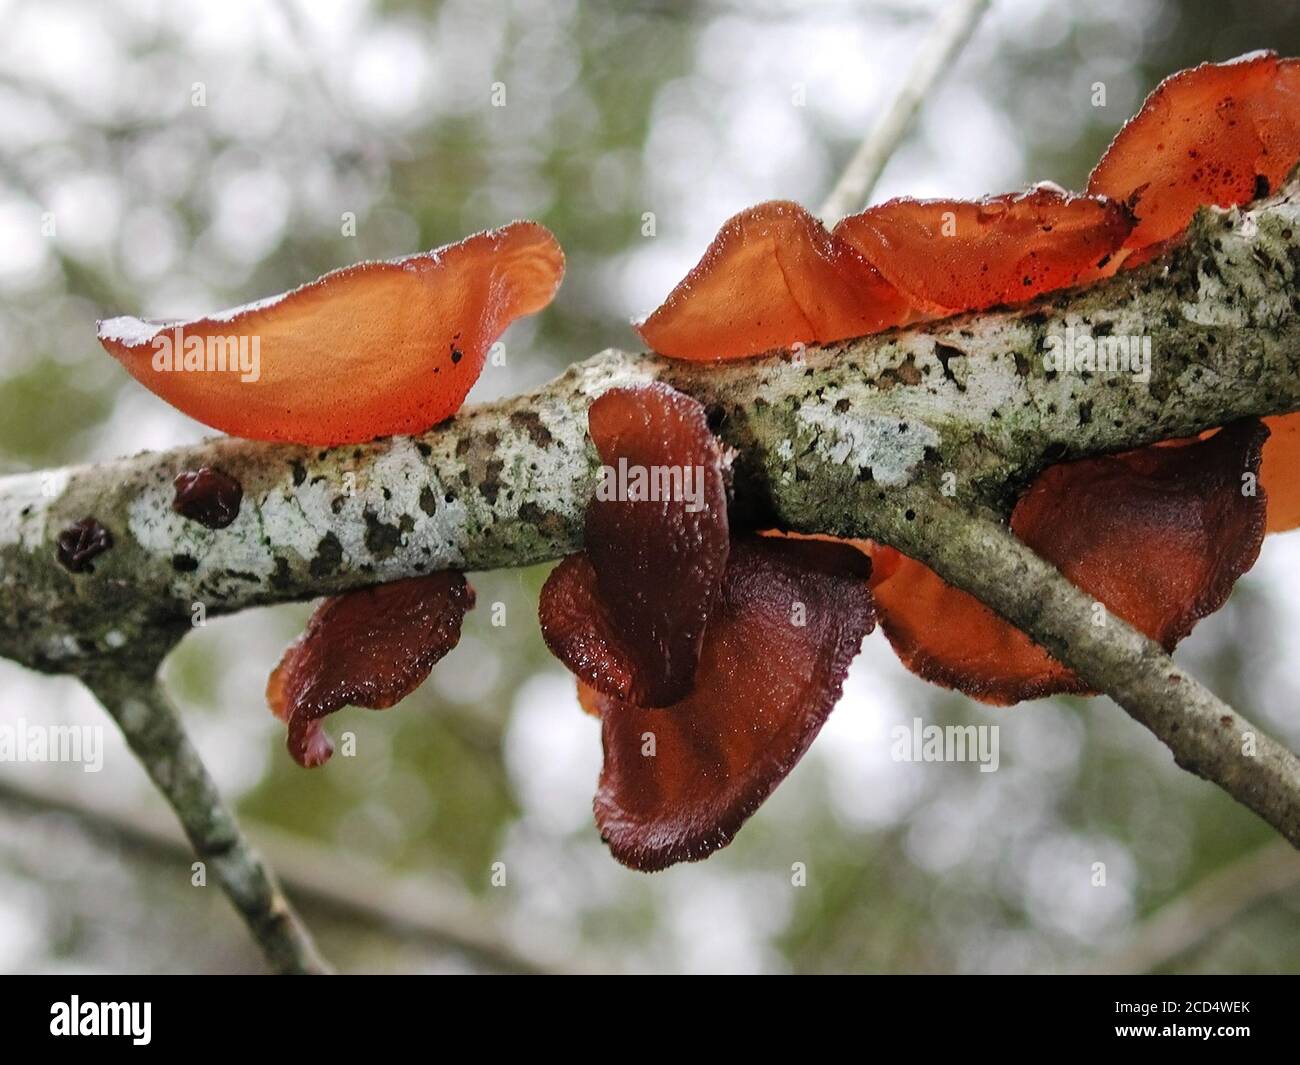 This is a form of fungi found in natural settings around the world.; This one is found in a forested area of North Central Florida. Jelly Fungus Stock Photo